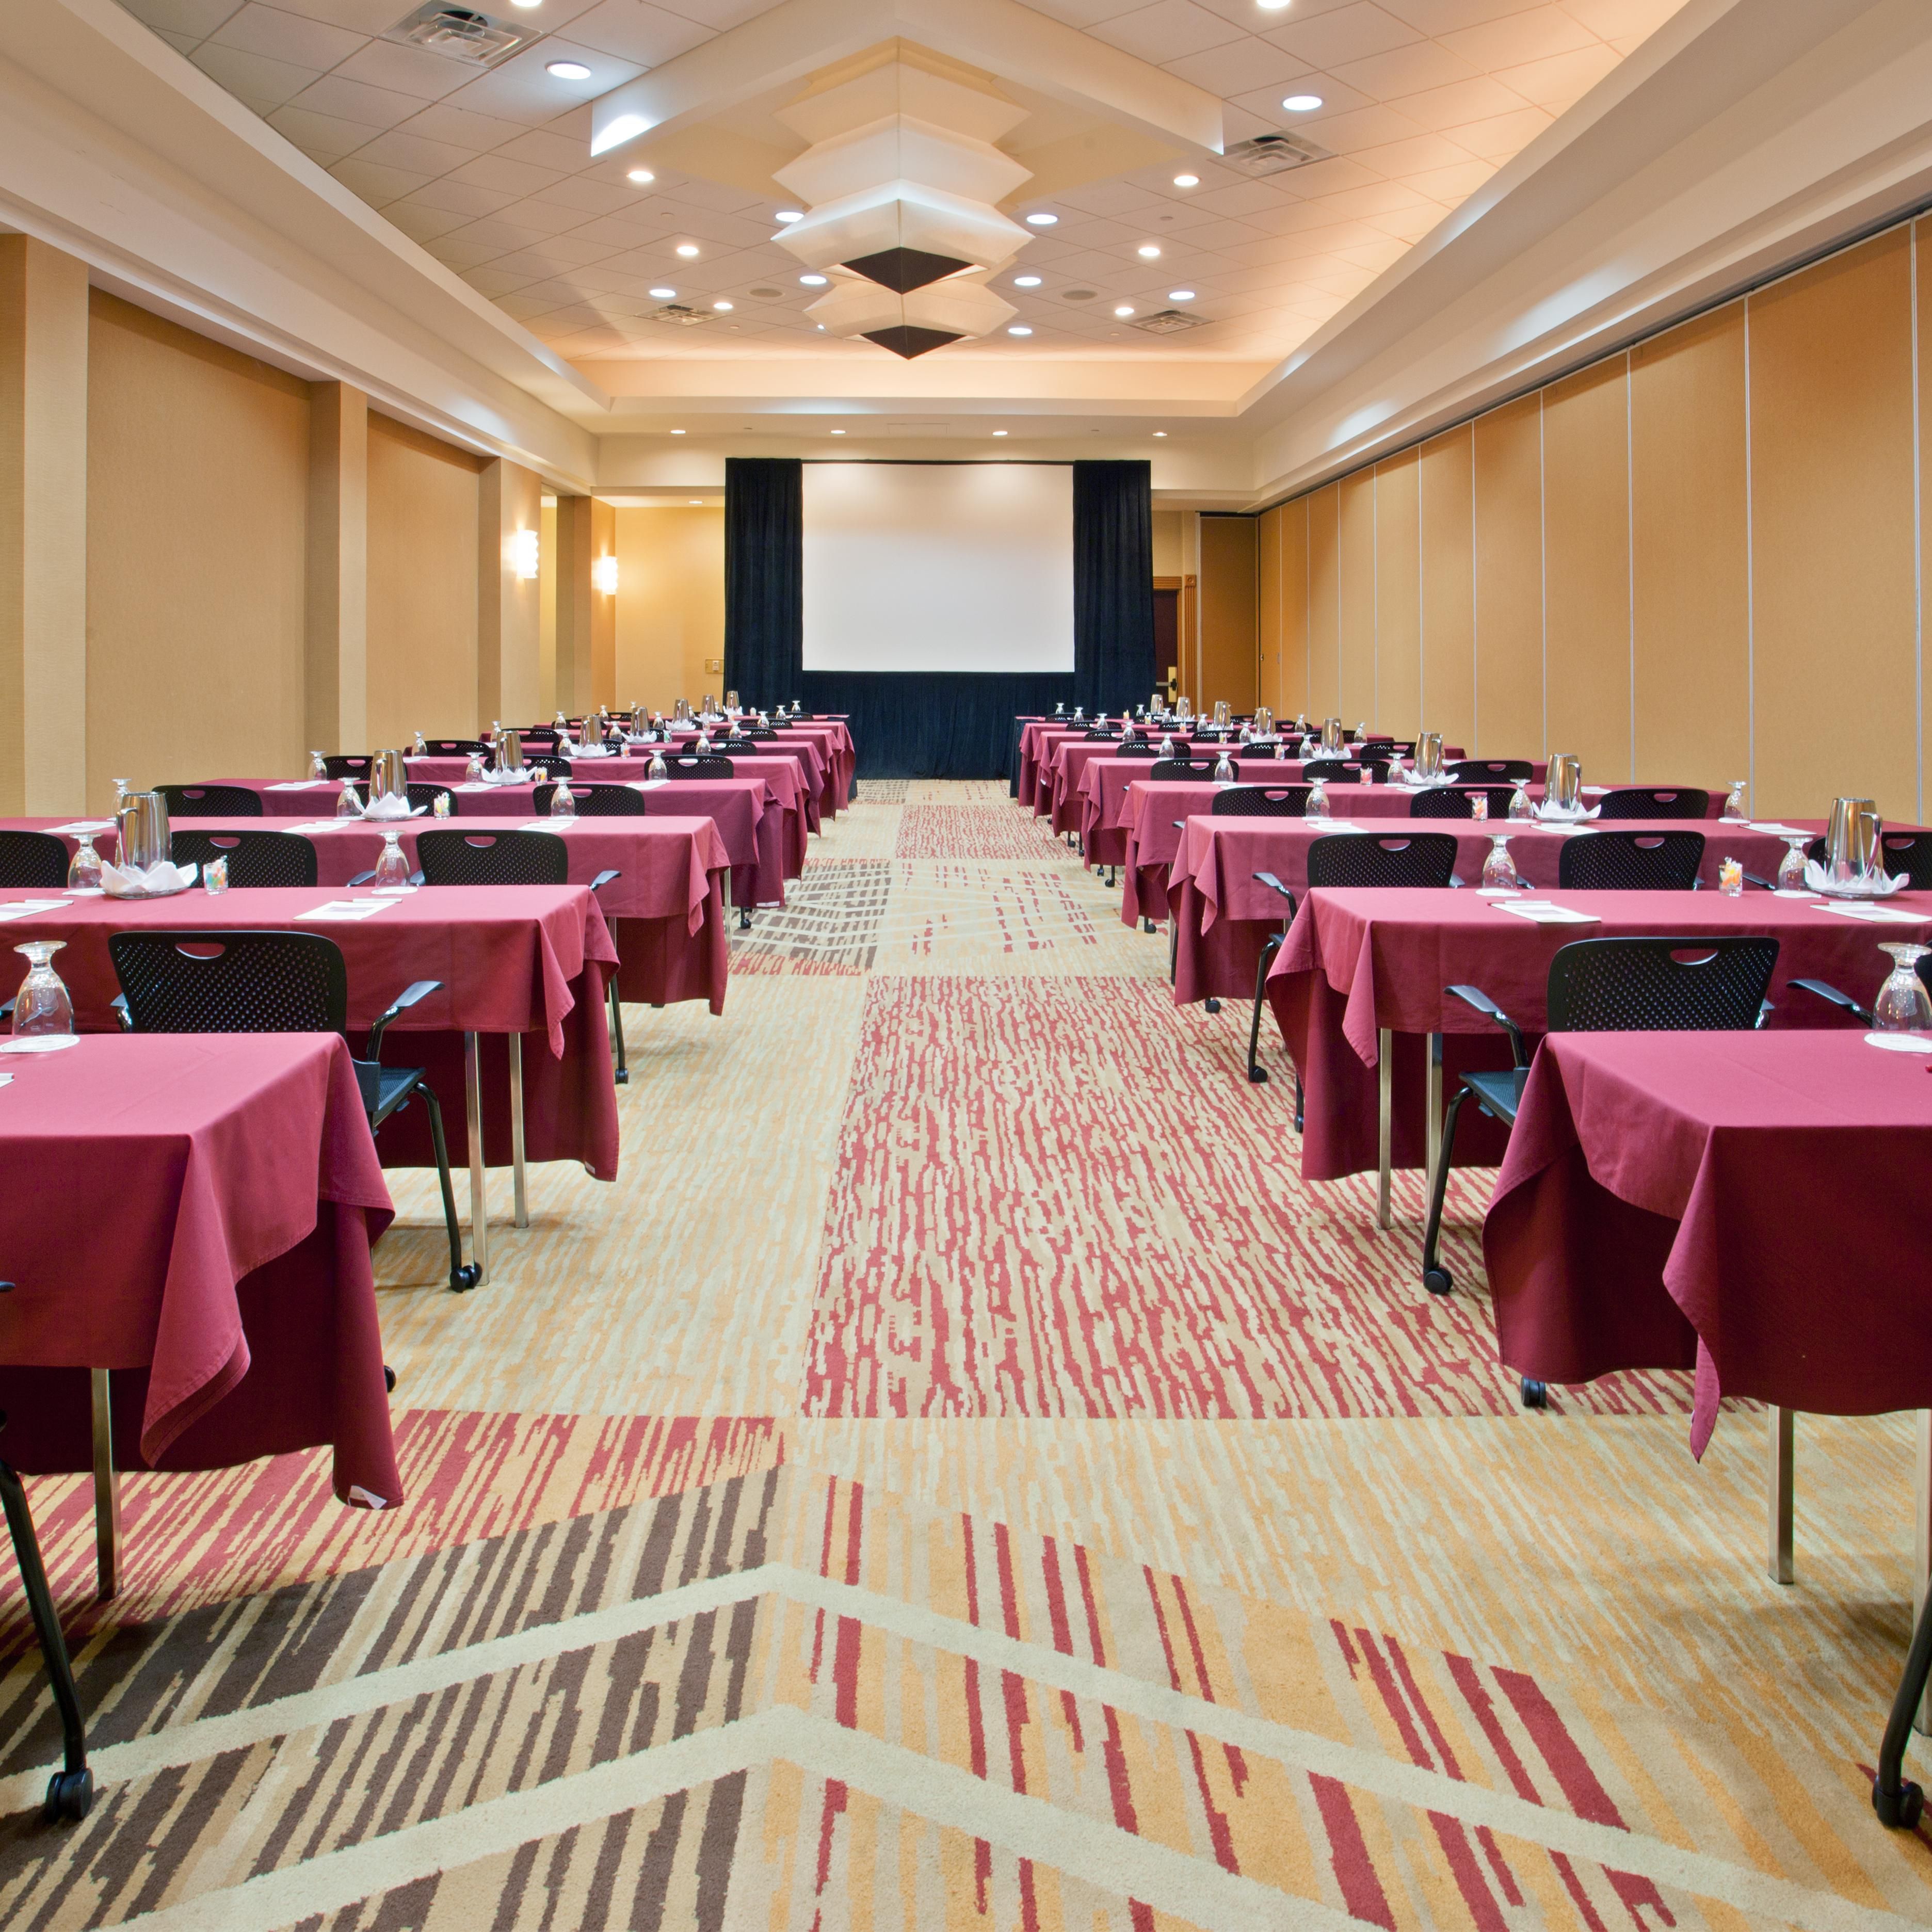 Let our expert staff plan your next meeting or event in Houston.